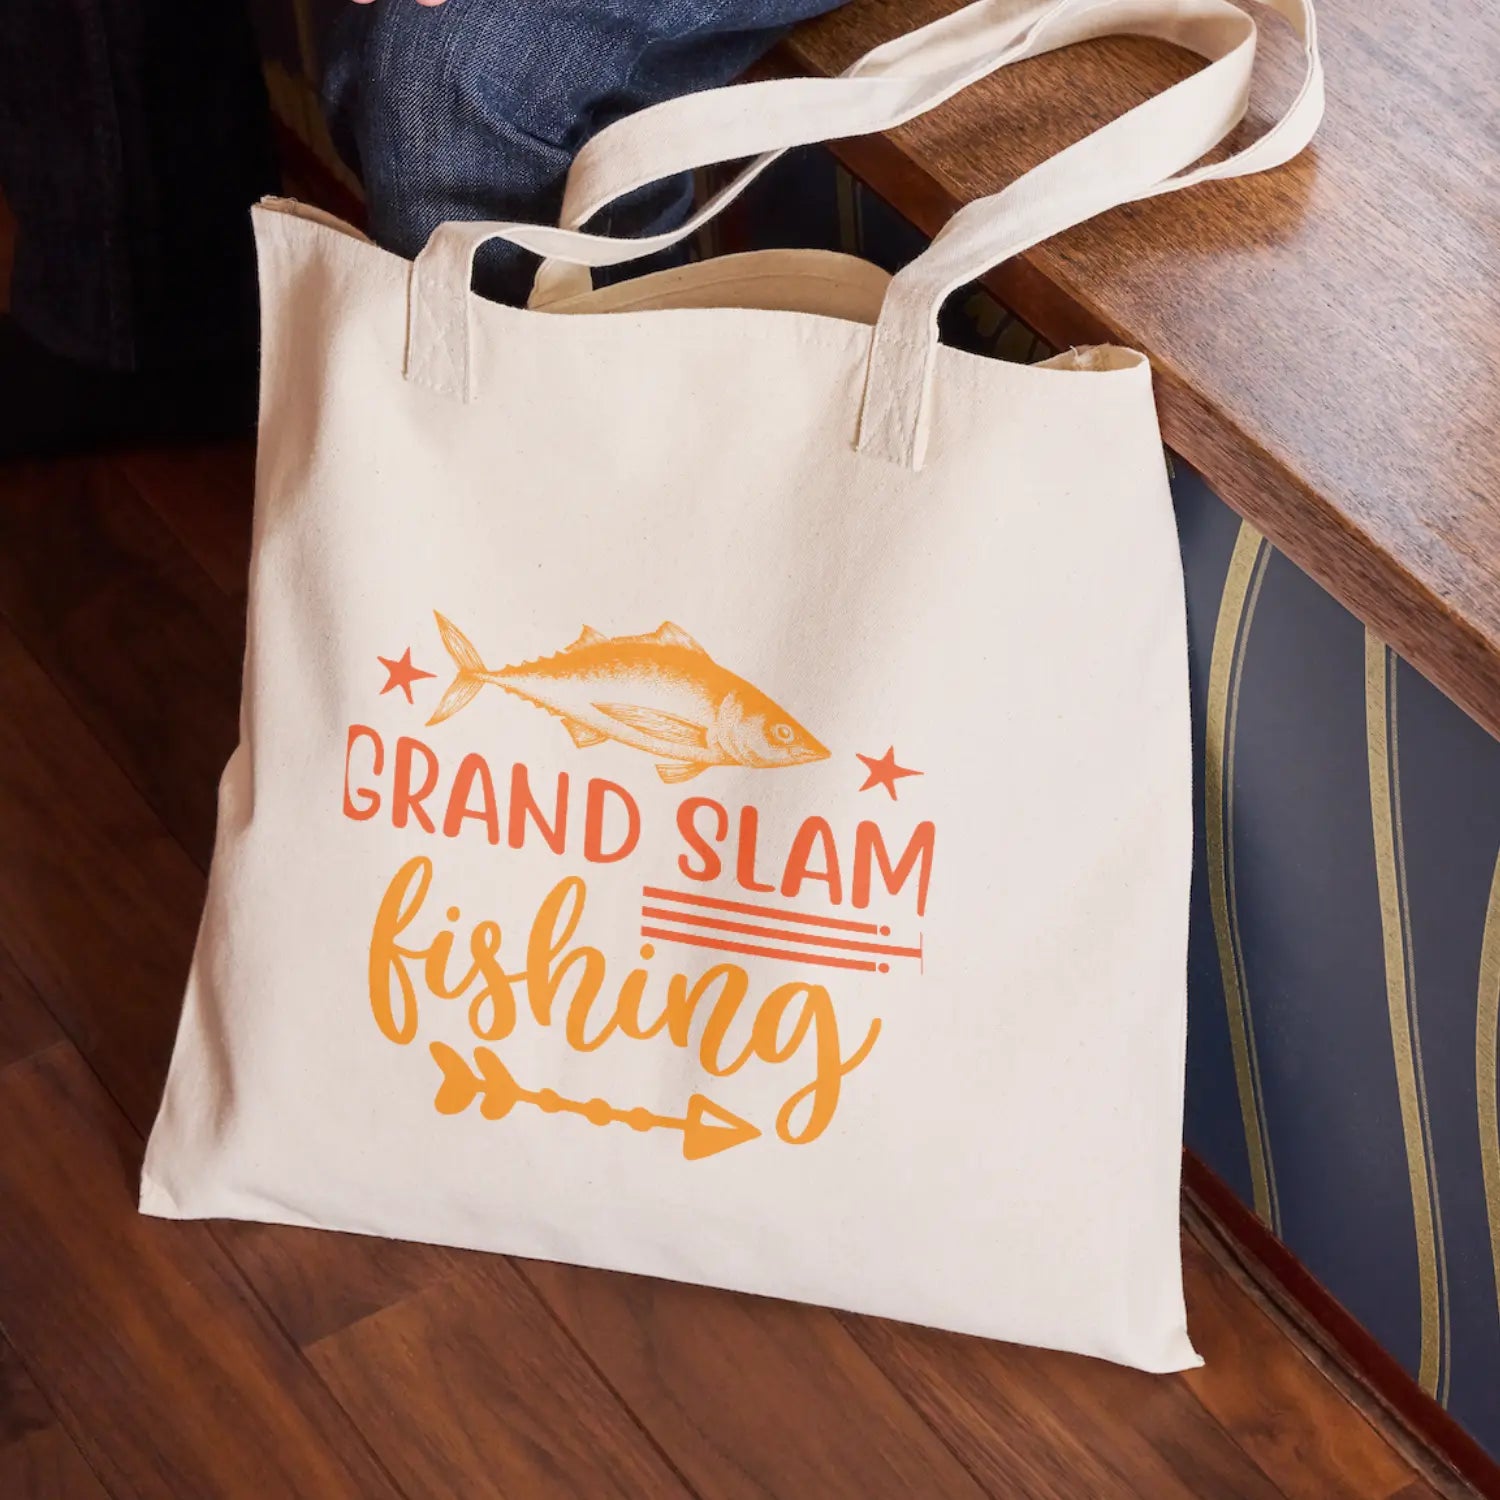 Grand salm fishing SVG | Digital Download | Cut File | SVG Only The Sweet Stuff